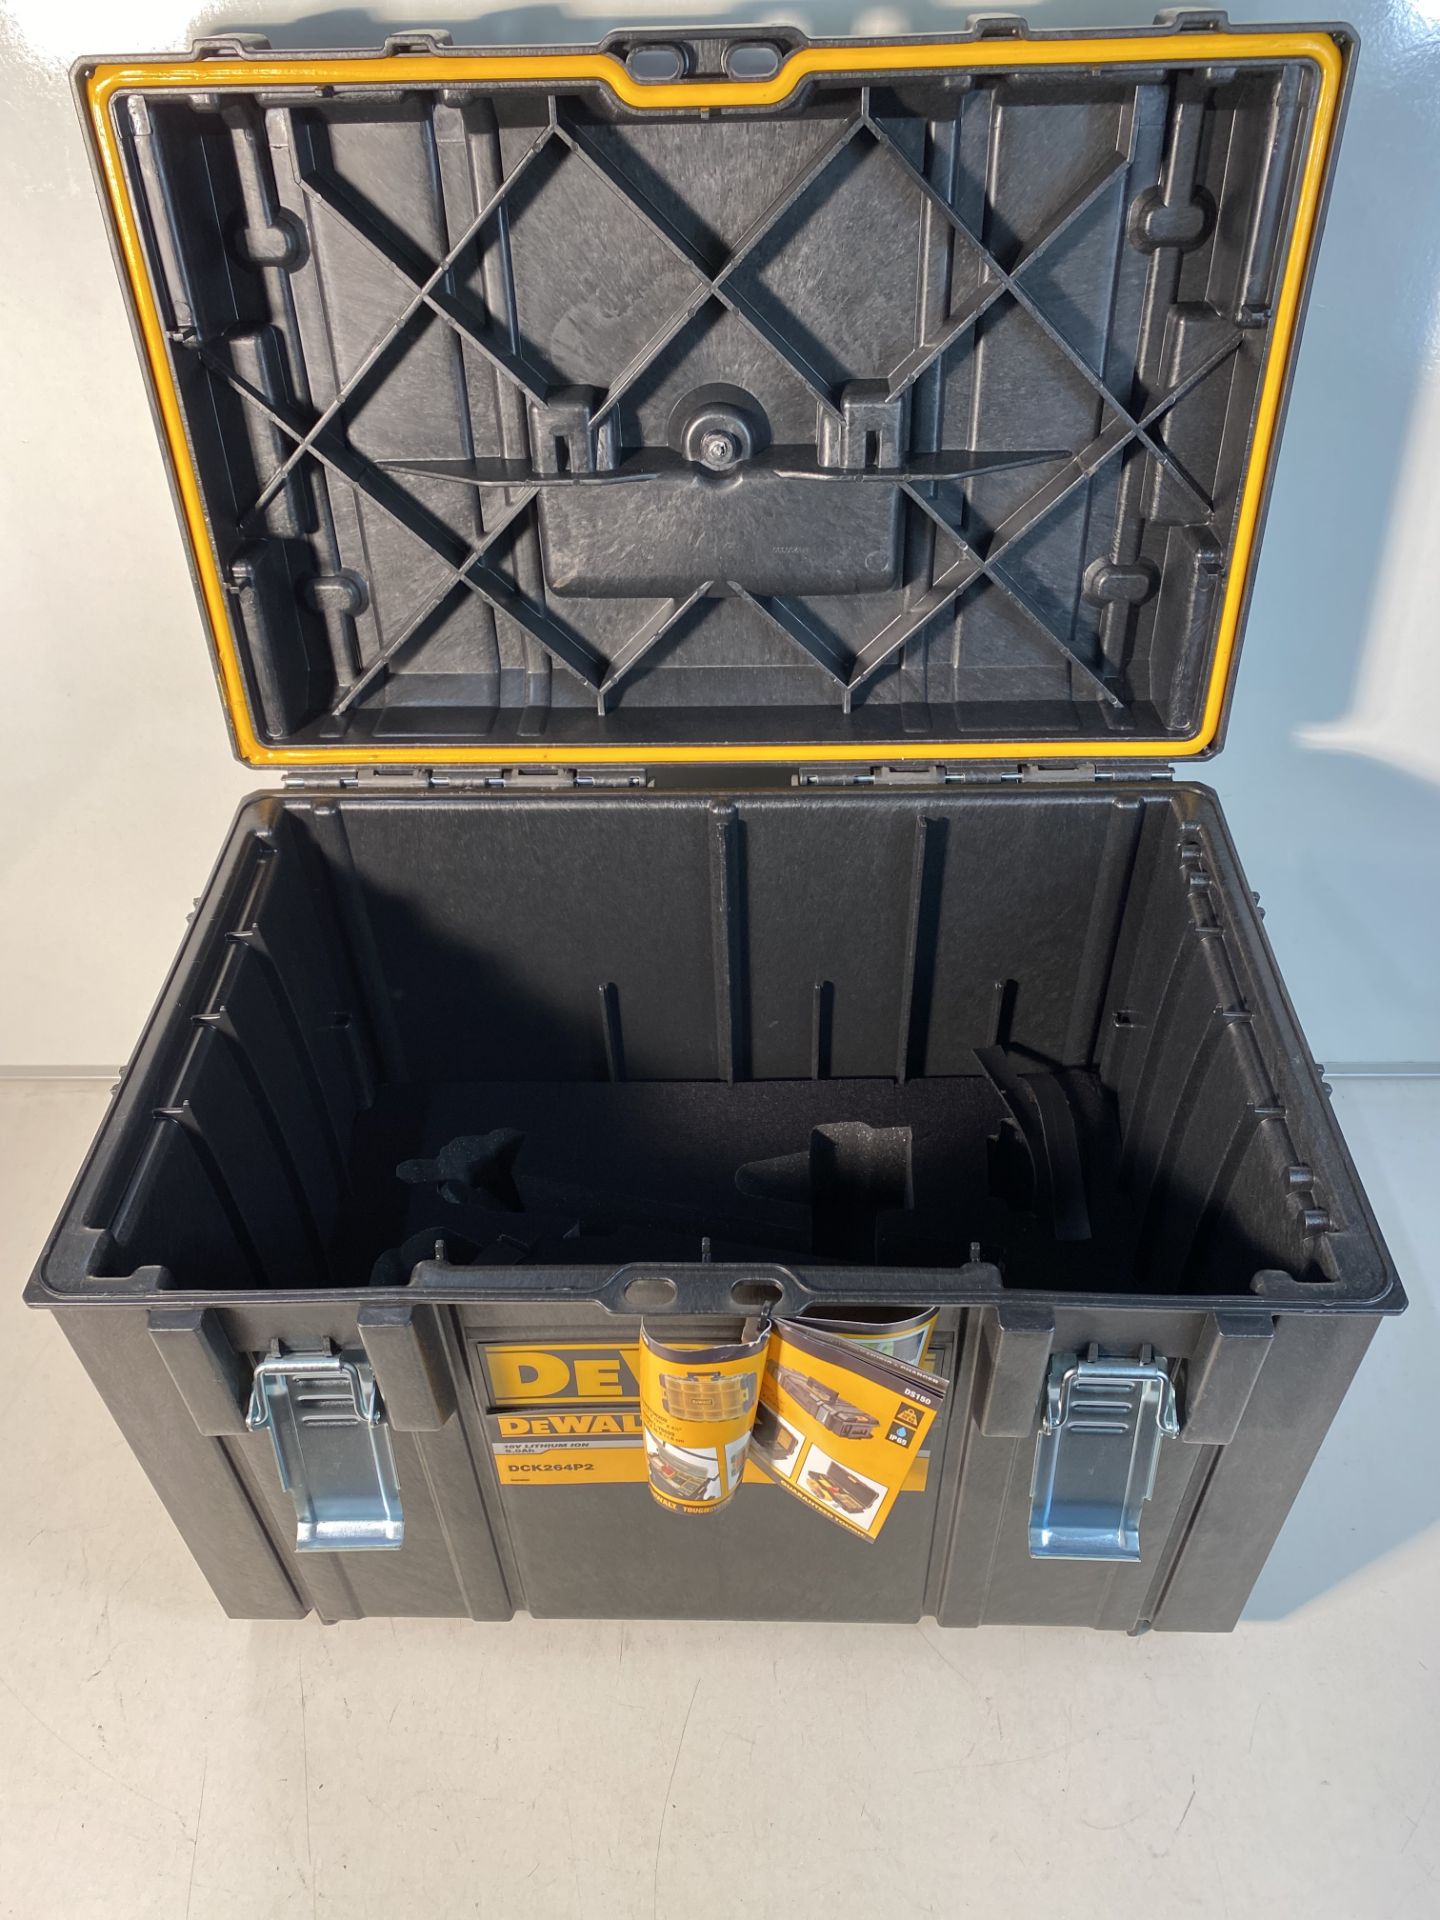 Case for DeWalt DCK264P2 18v 2x5.0Ah Li-ion XR 1st and 2nd Fix Nailer Twin Kit TSTAK CASE ONLY! - Image 2 of 3